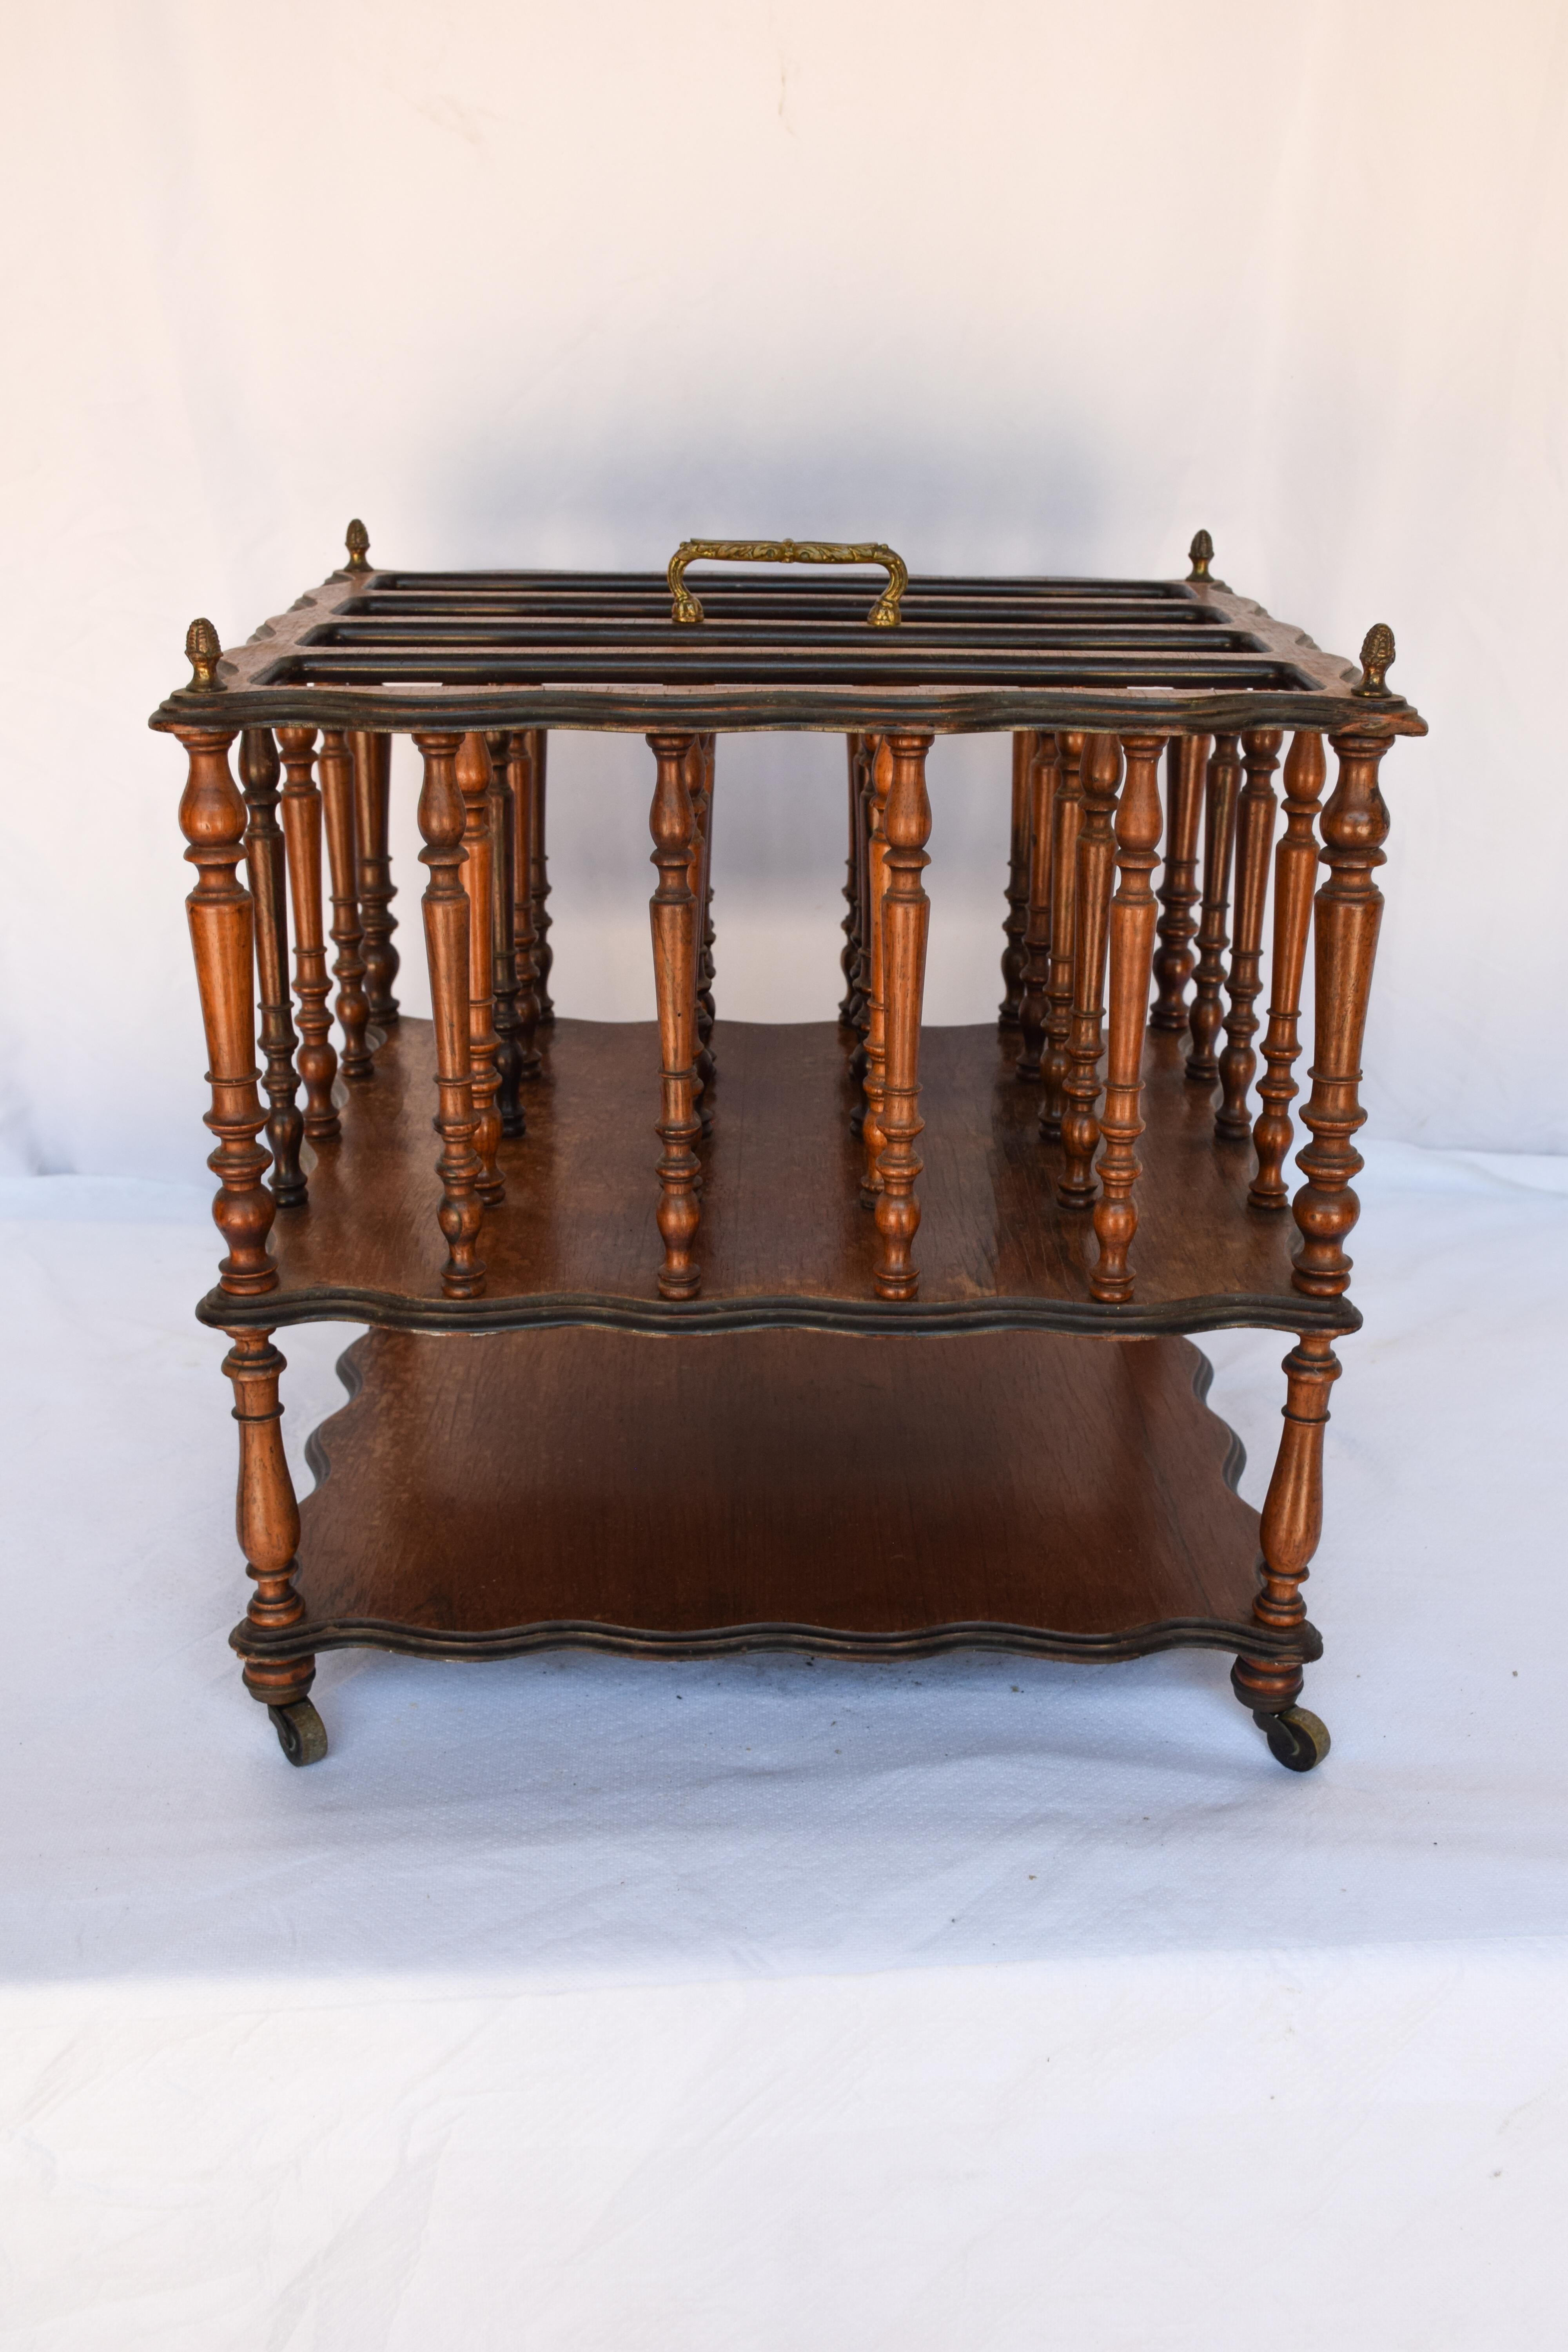 A good quality English Magazine Rack having four slatted divisions. Turned spindles with an additional shelf below. Accented with brass finials and a brass handle.

Measures: 14 1/2